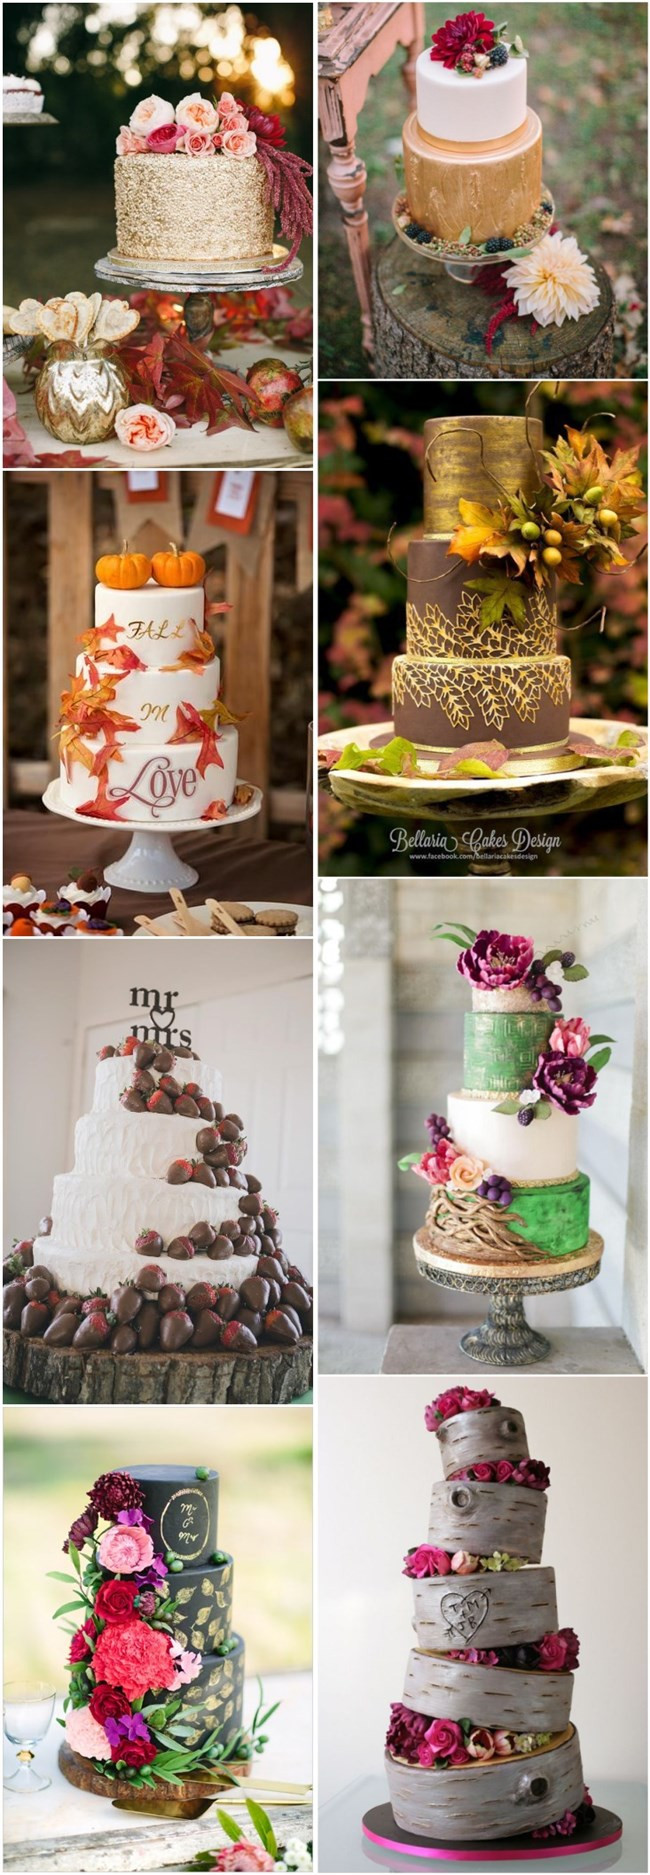 Rustic Fall Wedding Cakes
 45 Incredible Fall Wedding Cakes that WOW